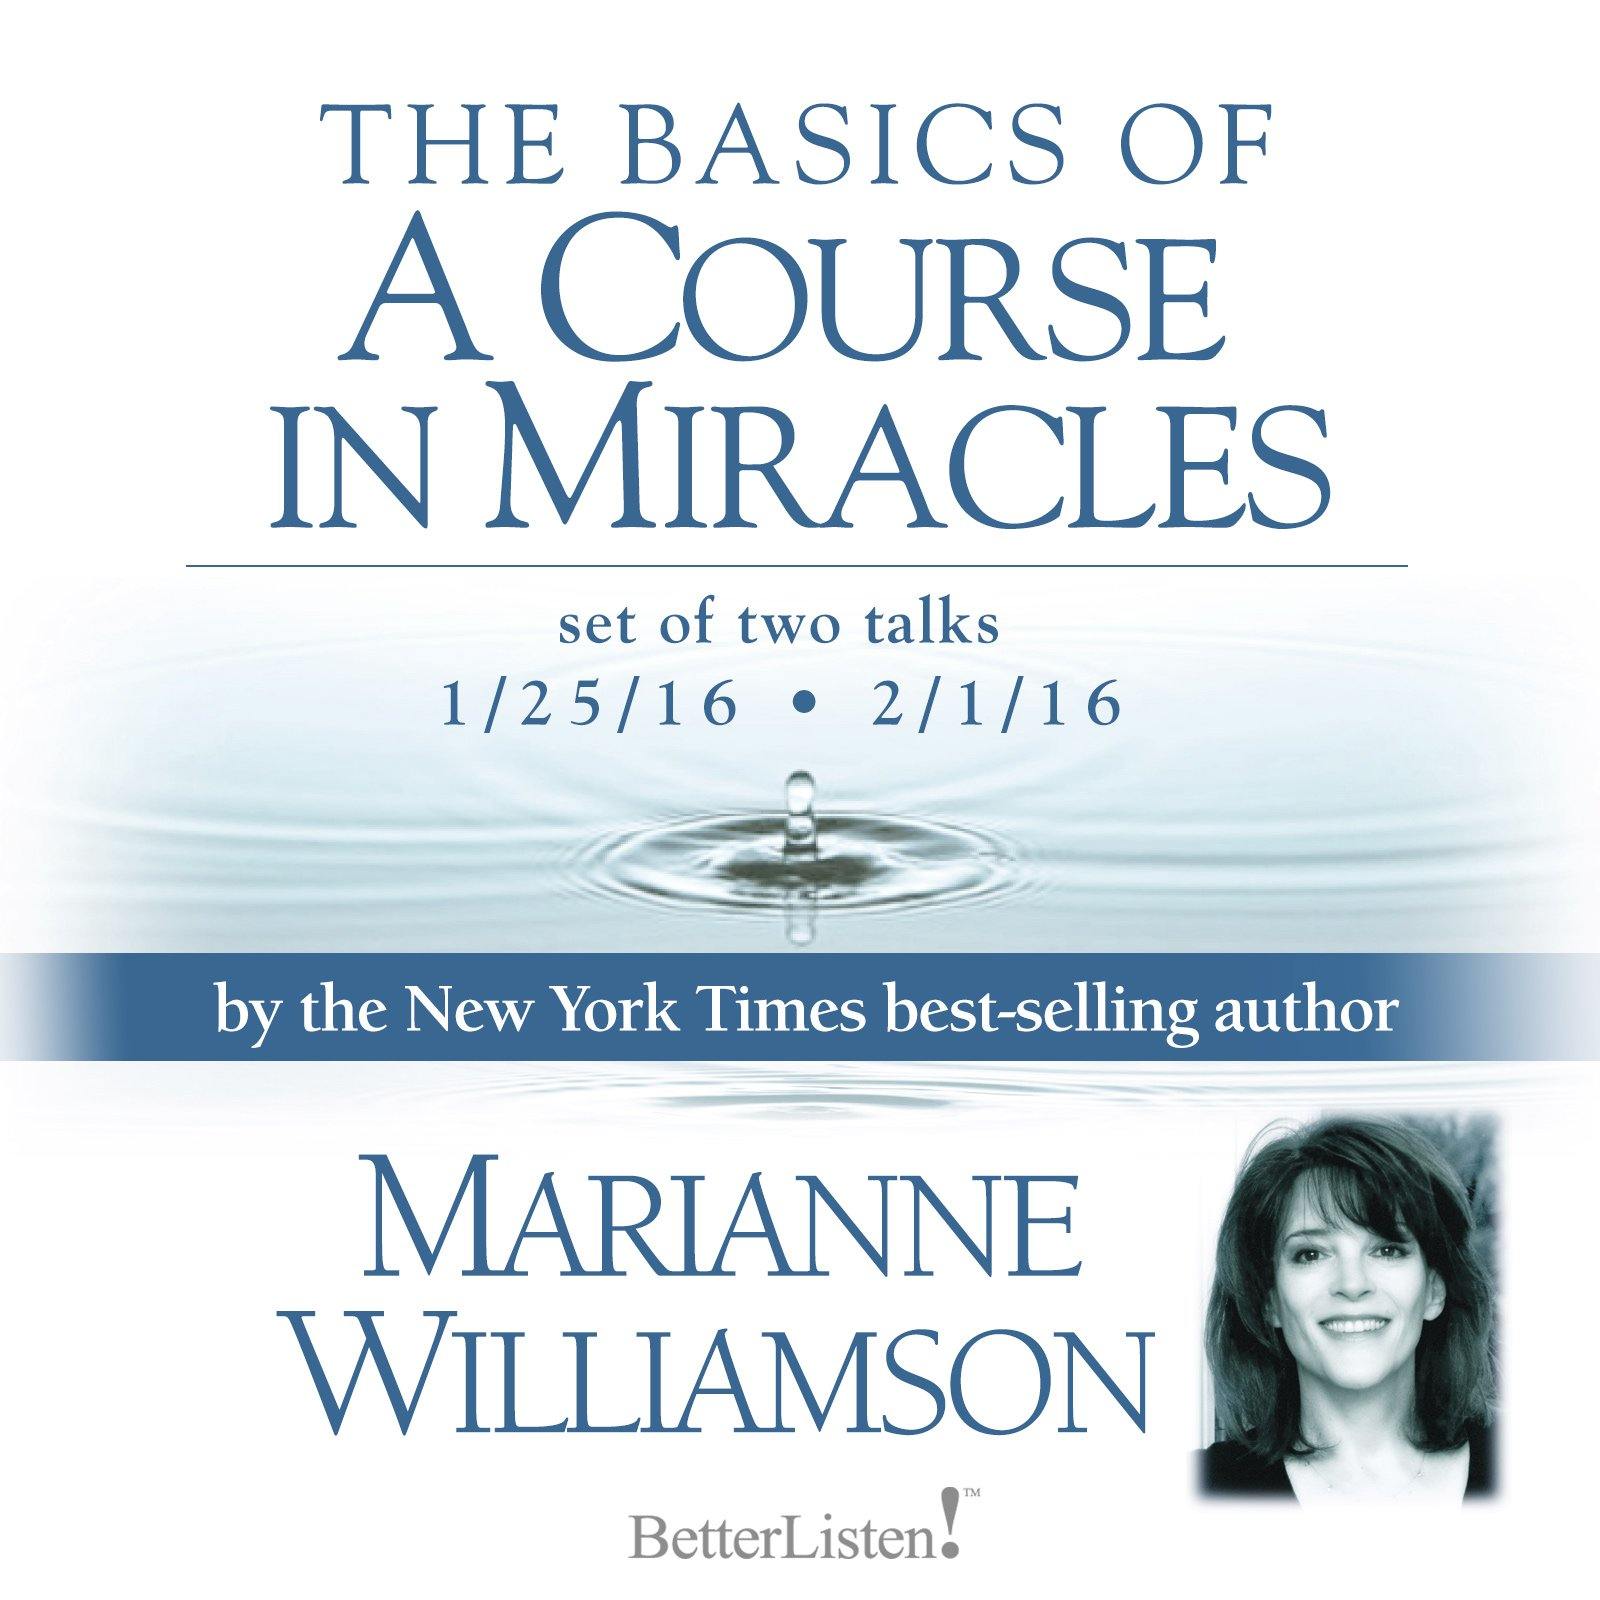 The Basics of a Course in Miracles with Marianne Williamson - BetterListen!